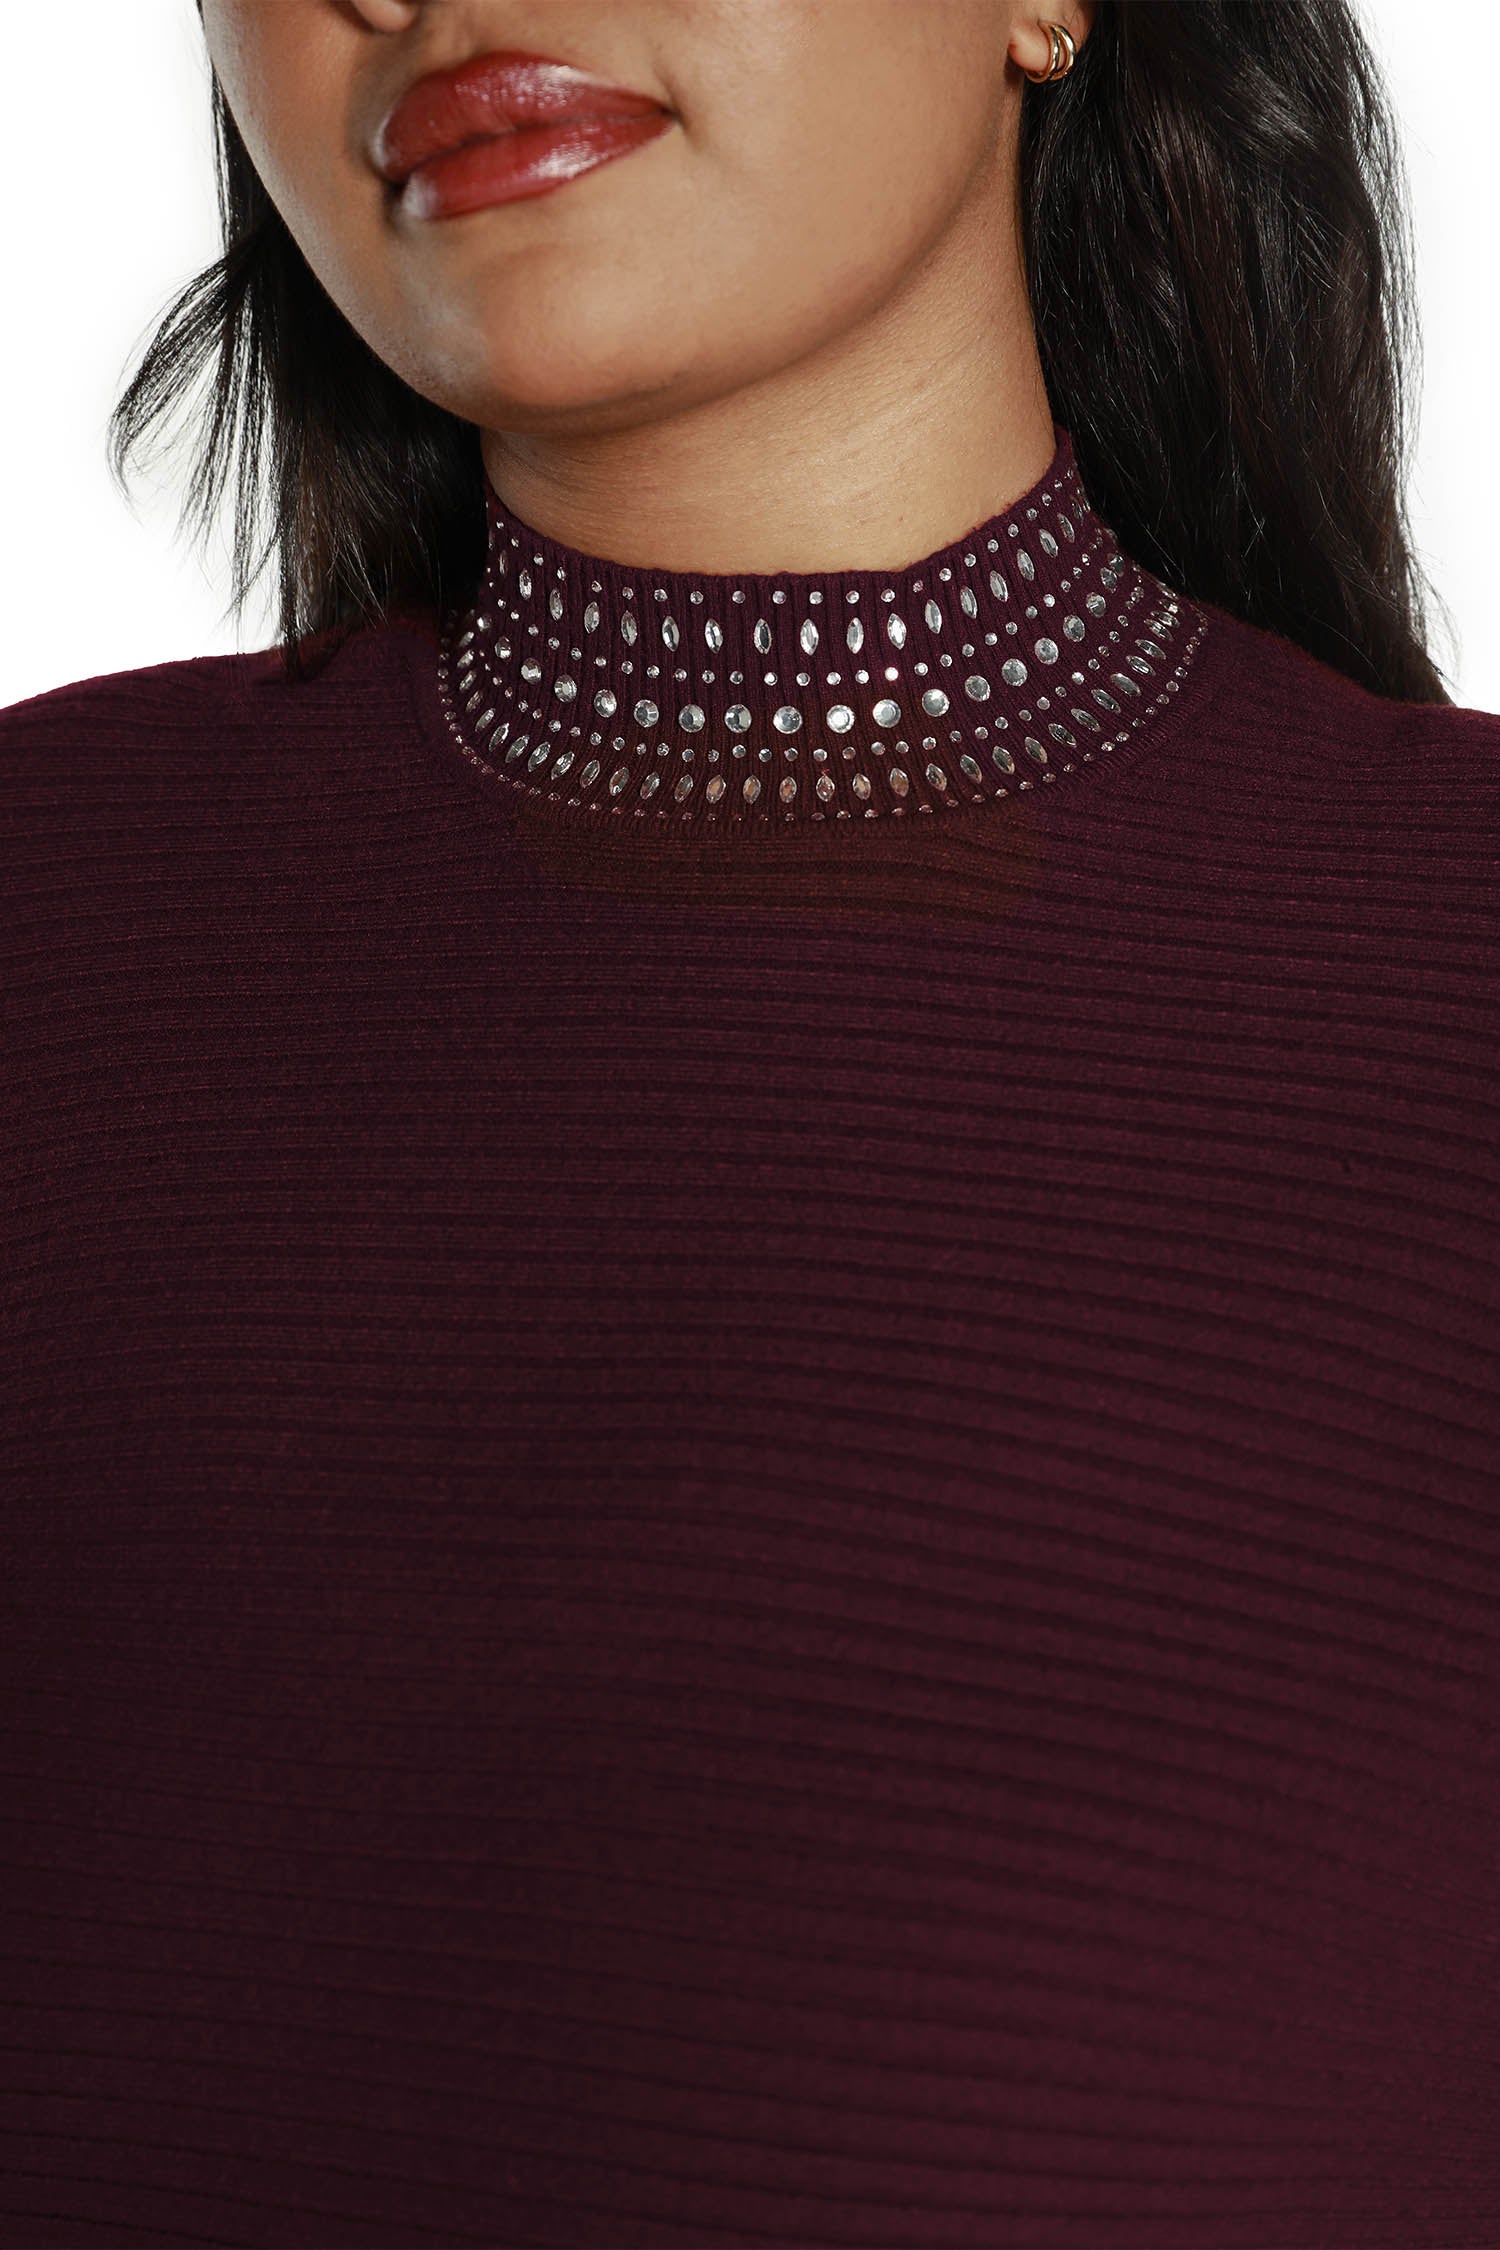 Women's Long Sleeve Sweater in a Ribbed Knit with Dolman Sleeves and Rhinestone Detailed Mock Neck | Curvy